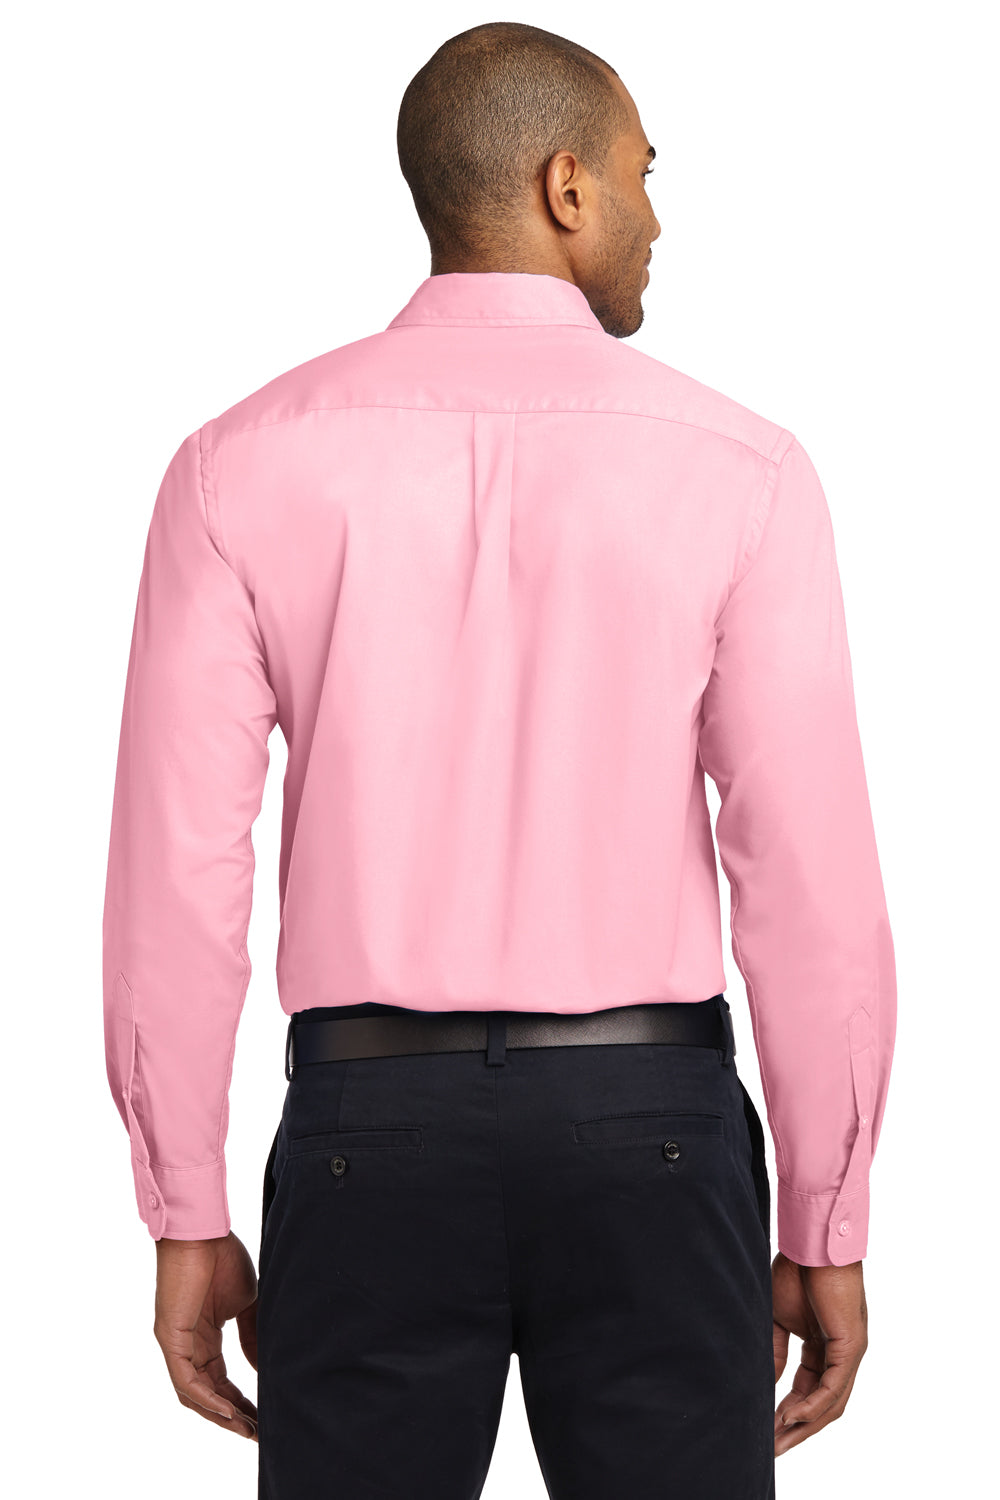 Port Authority S608/TLS608/S608ES Mens Easy Care Wrinkle Resistant Long Sleeve Button Down Shirt w/ Pocket Light Pink Back